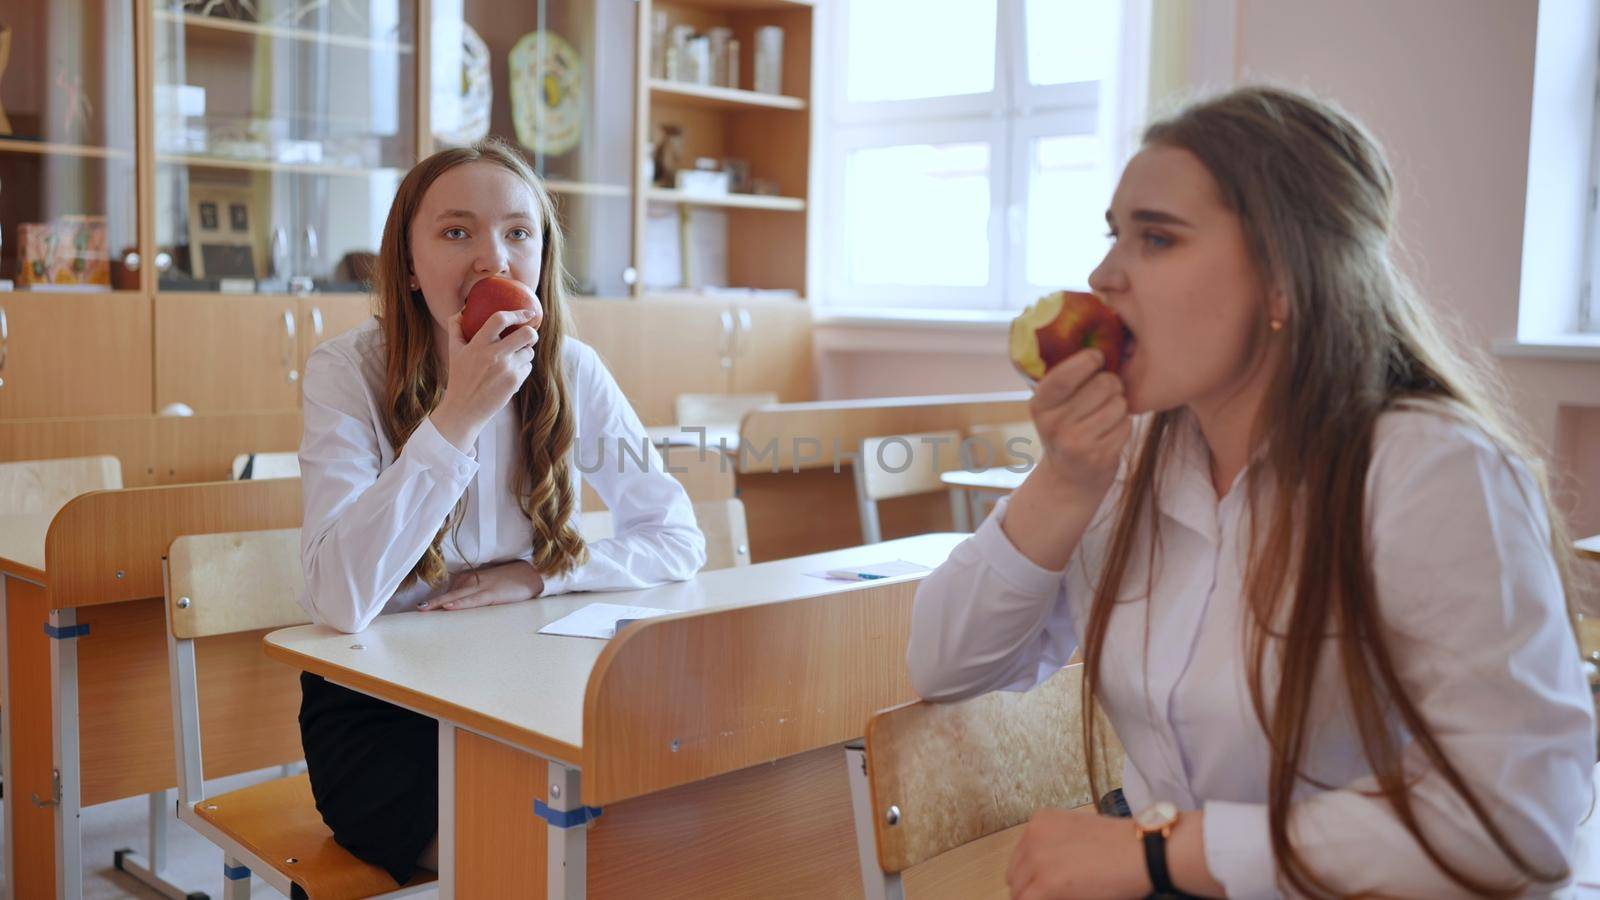 Girls eat apples in class during recess. by DovidPro